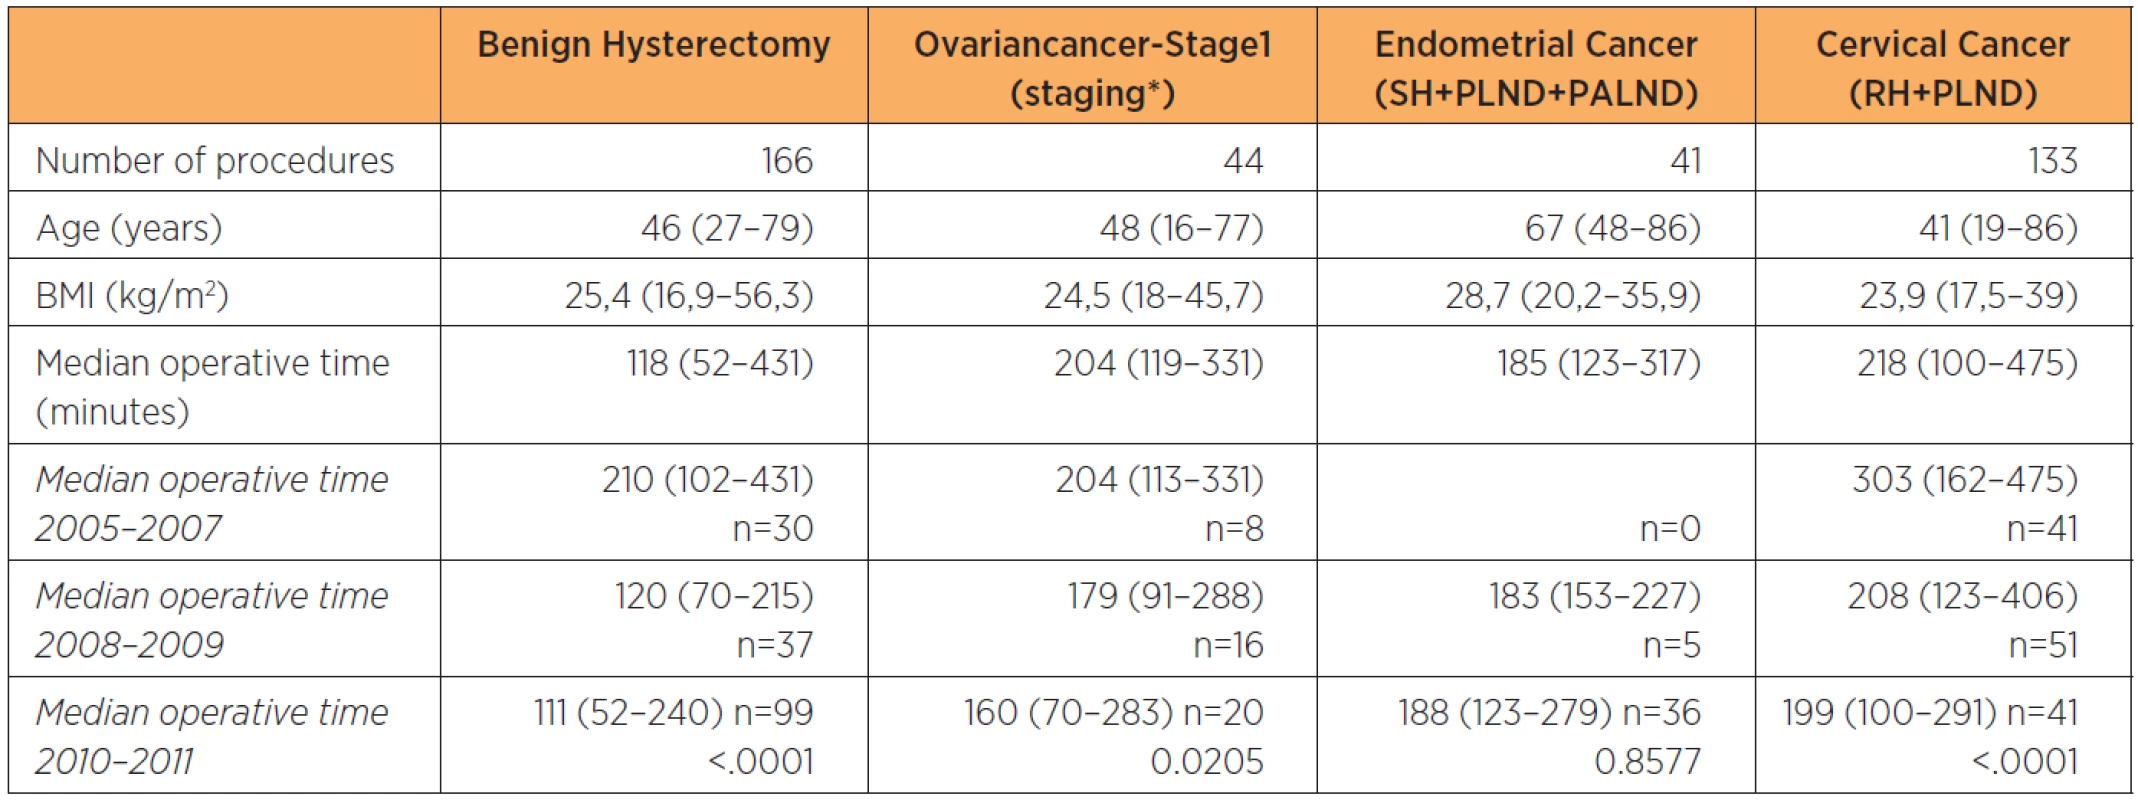 Demographics and surgical time for benign hysterectomy, staging for stage 1 ovarian cancer, staging for endometrial cancer, and radical hysterectomy including pelvic lymphadenectomy for cervical cancer on consecutive patients at a tertiary referral teaching hospital